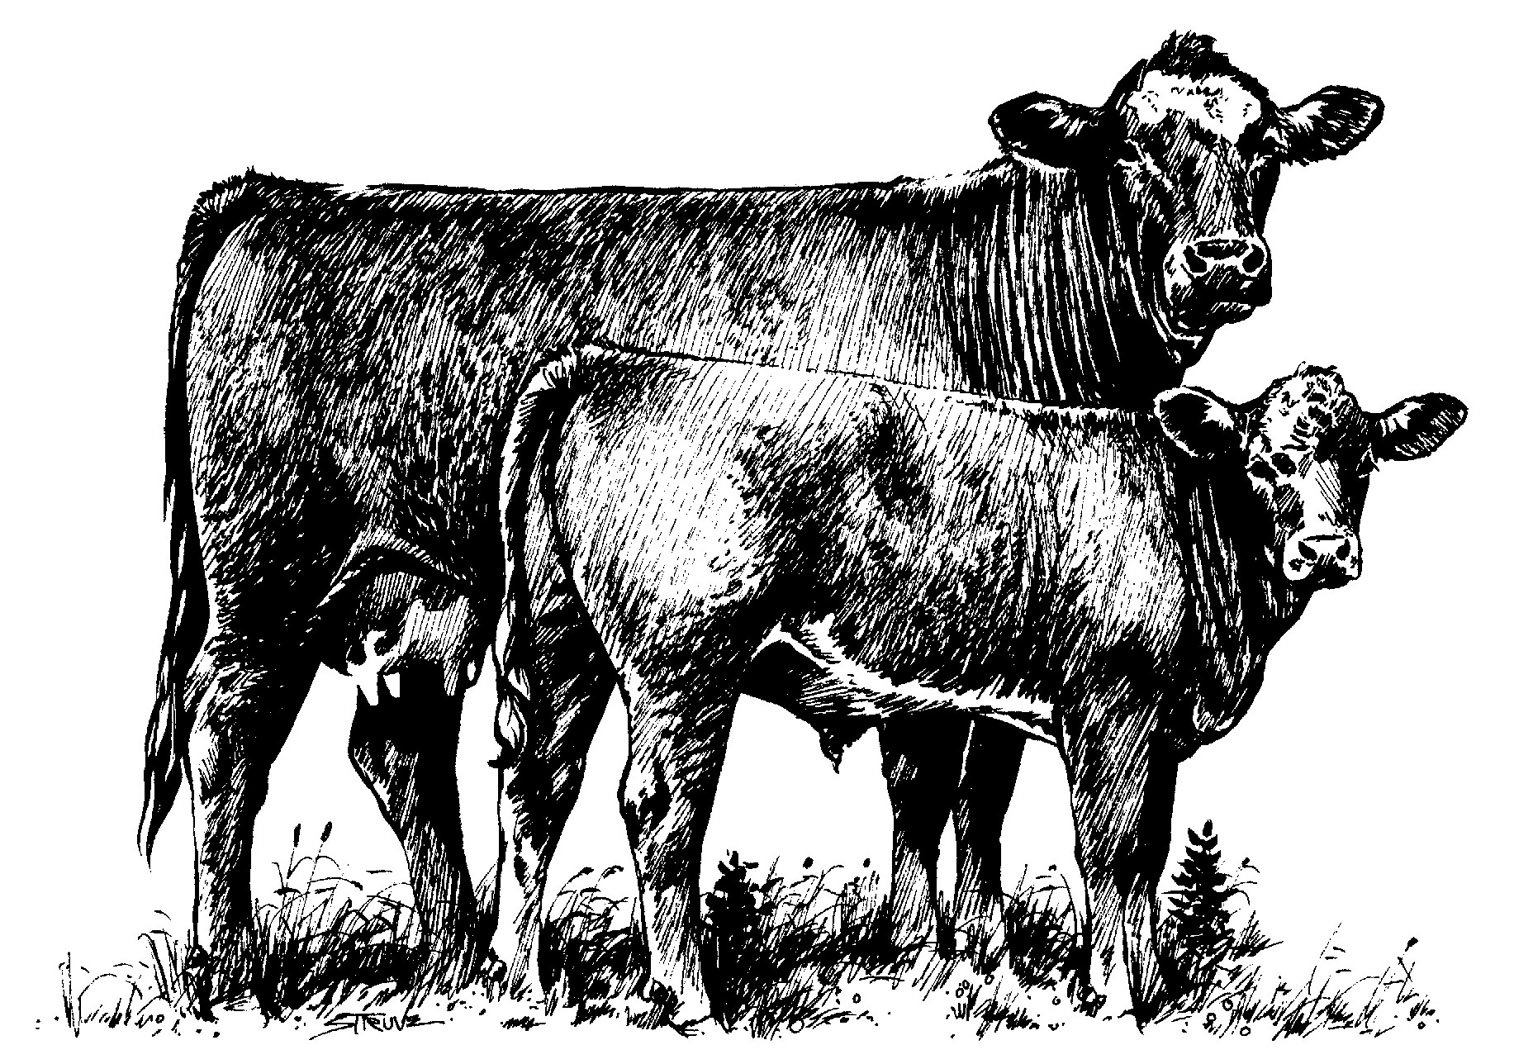 cattle clipart .